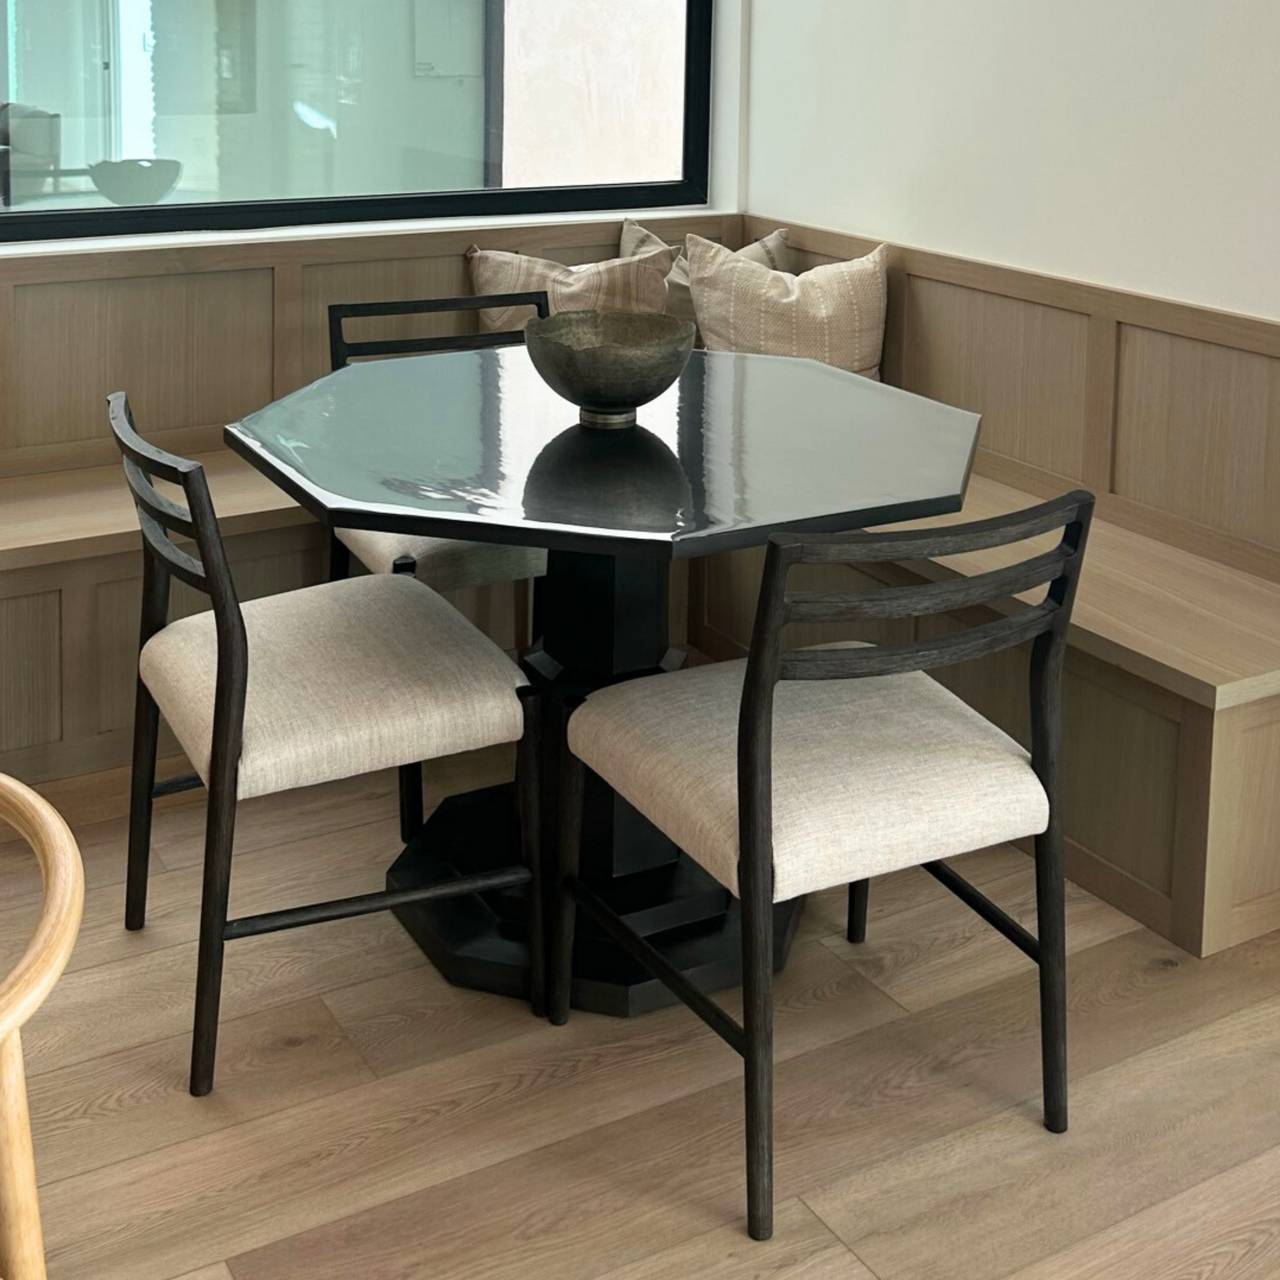 Ono Dining Table